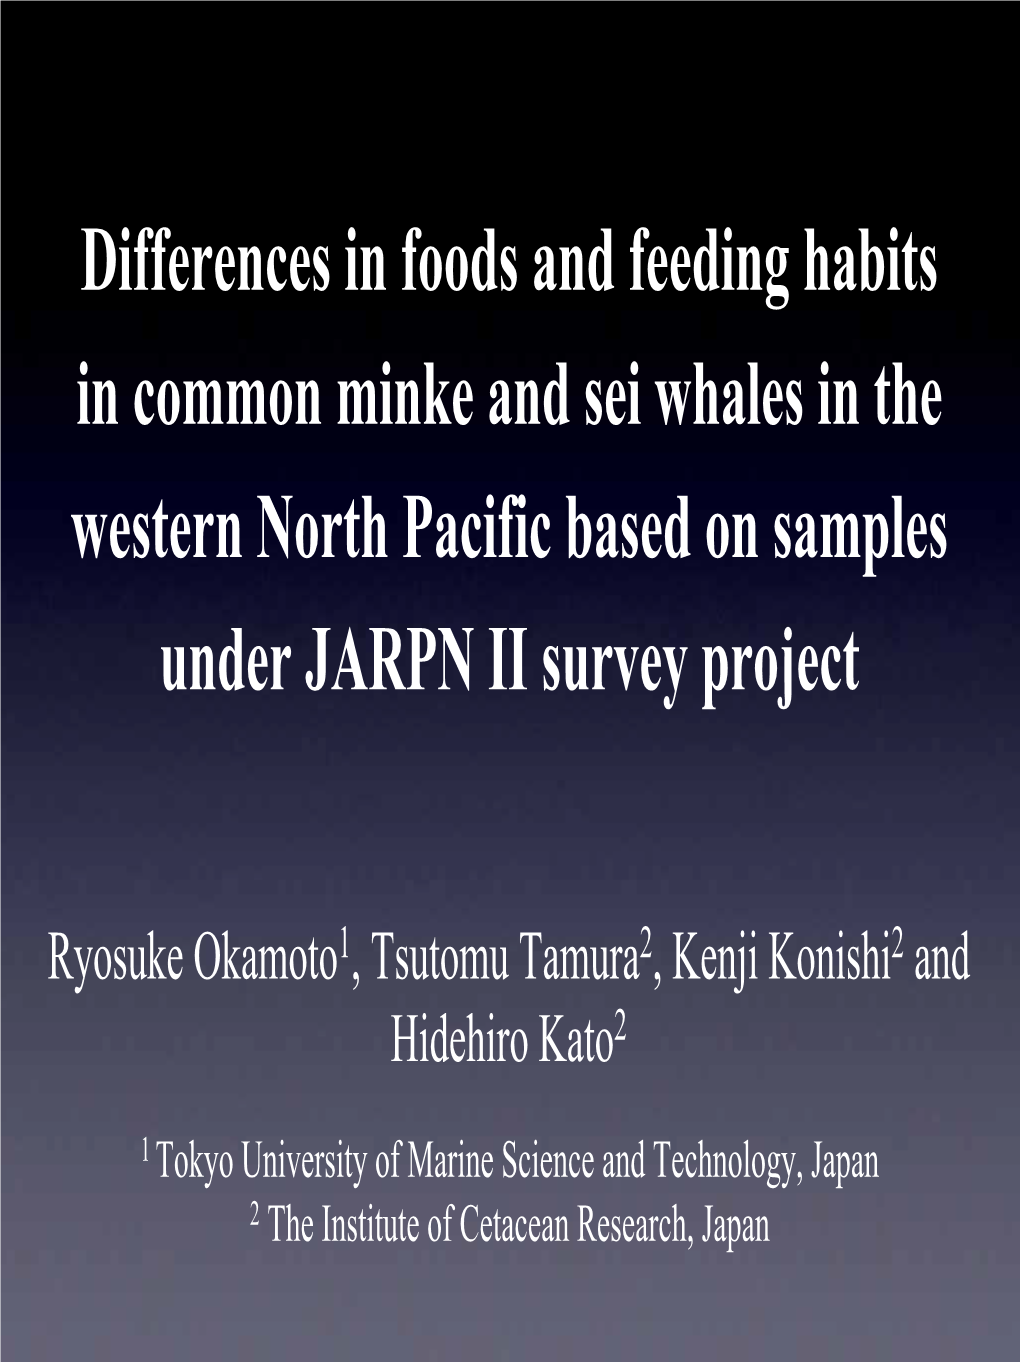 Differences in Foods and Feeding Habits in Common Minke and Sei Whales in the Western North Pacific Based on Samples Under JARPN II Survey Project